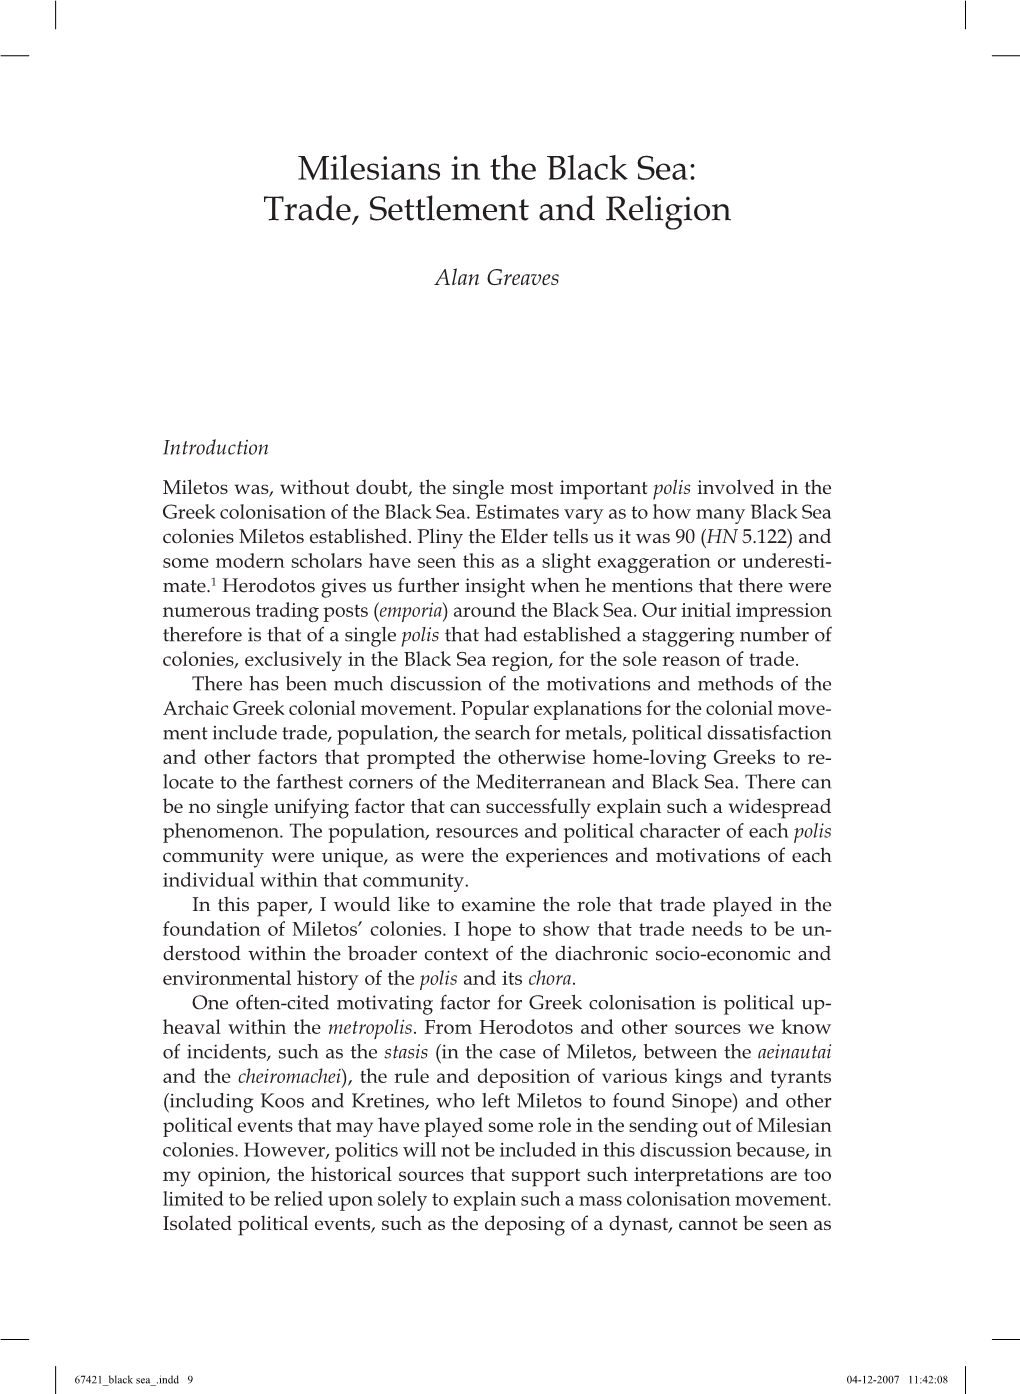 Milesians in the Black Sea: Trade, Settlement and Religion